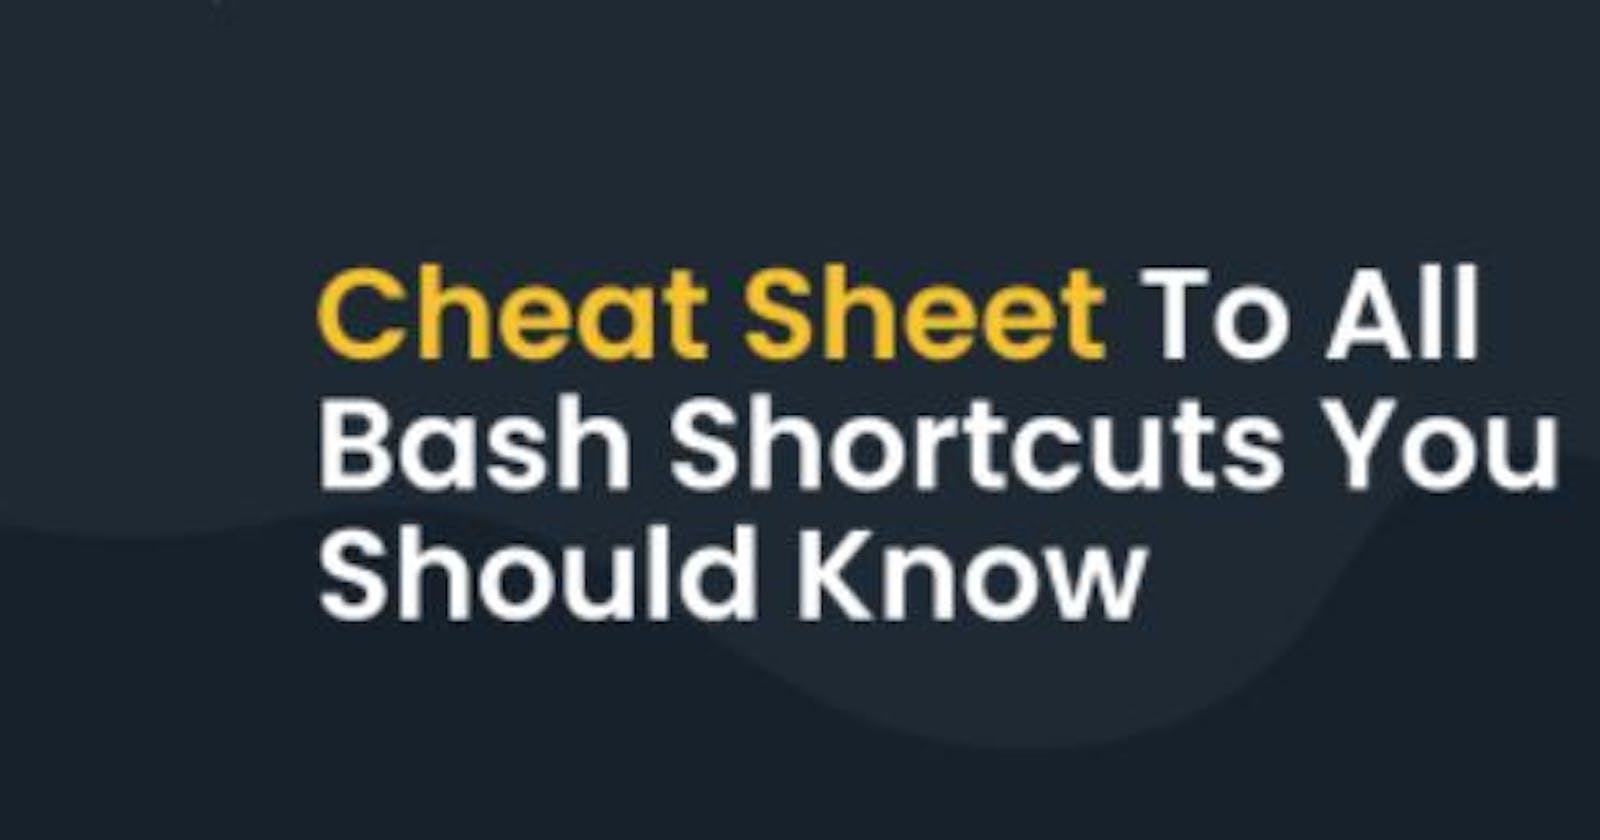 Cheat Sheet To All Bash Shortcuts You Should Know!!